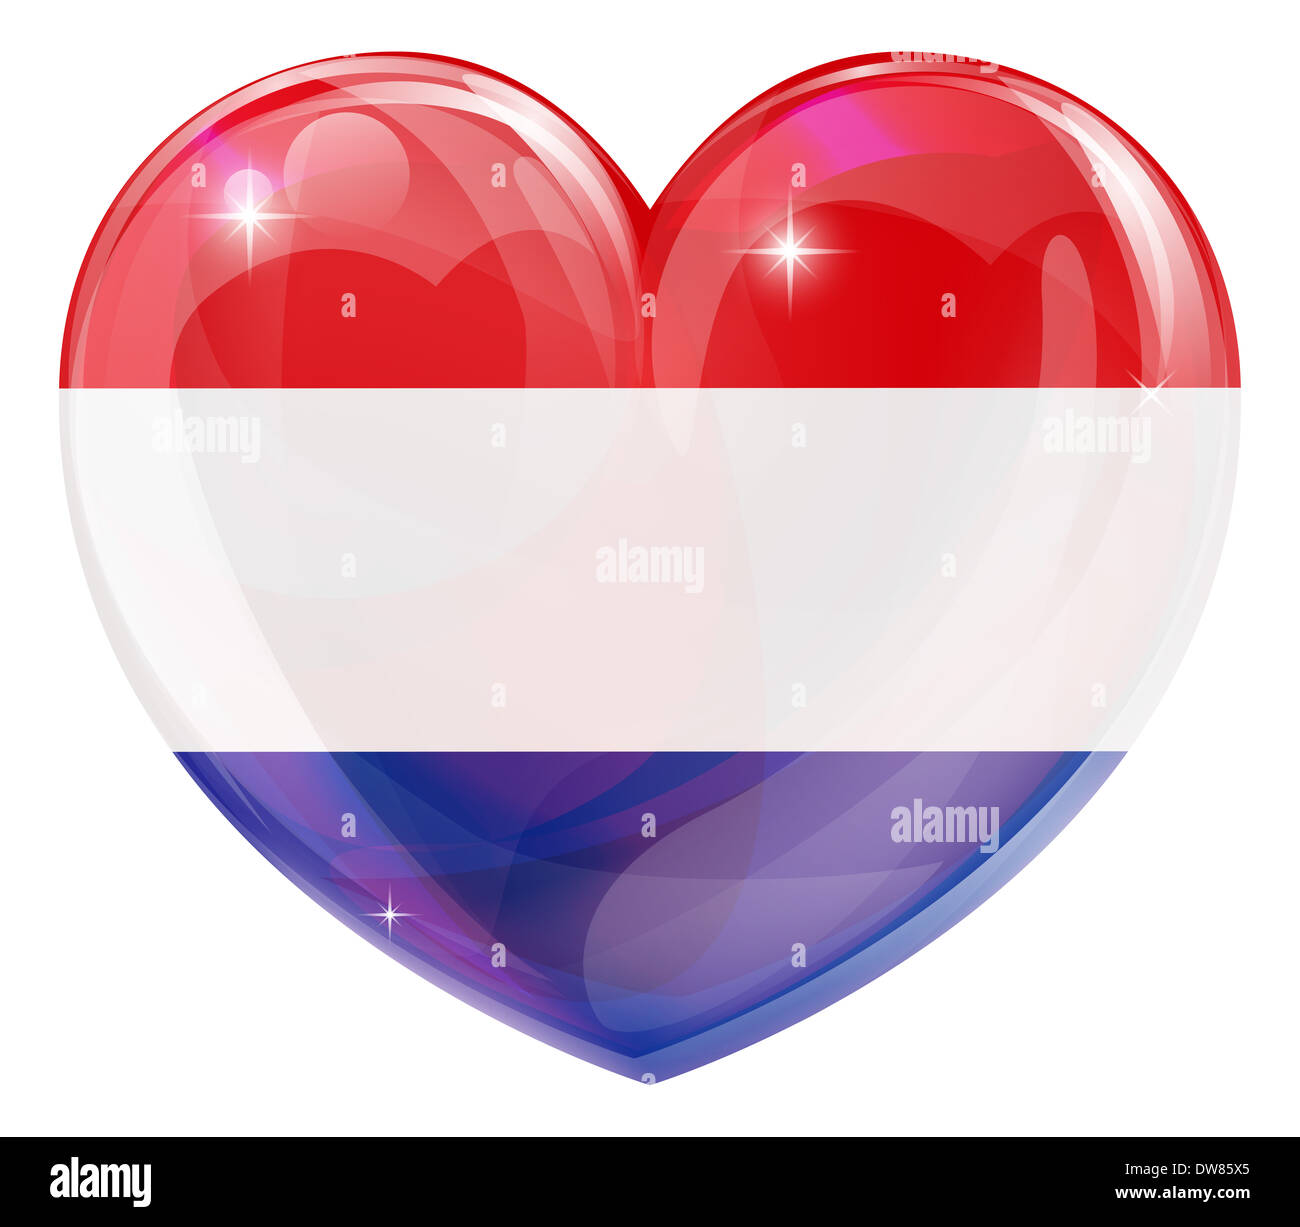 Dutch flag love heart concept with the Netherlands flag in a heart shape Stock Photo